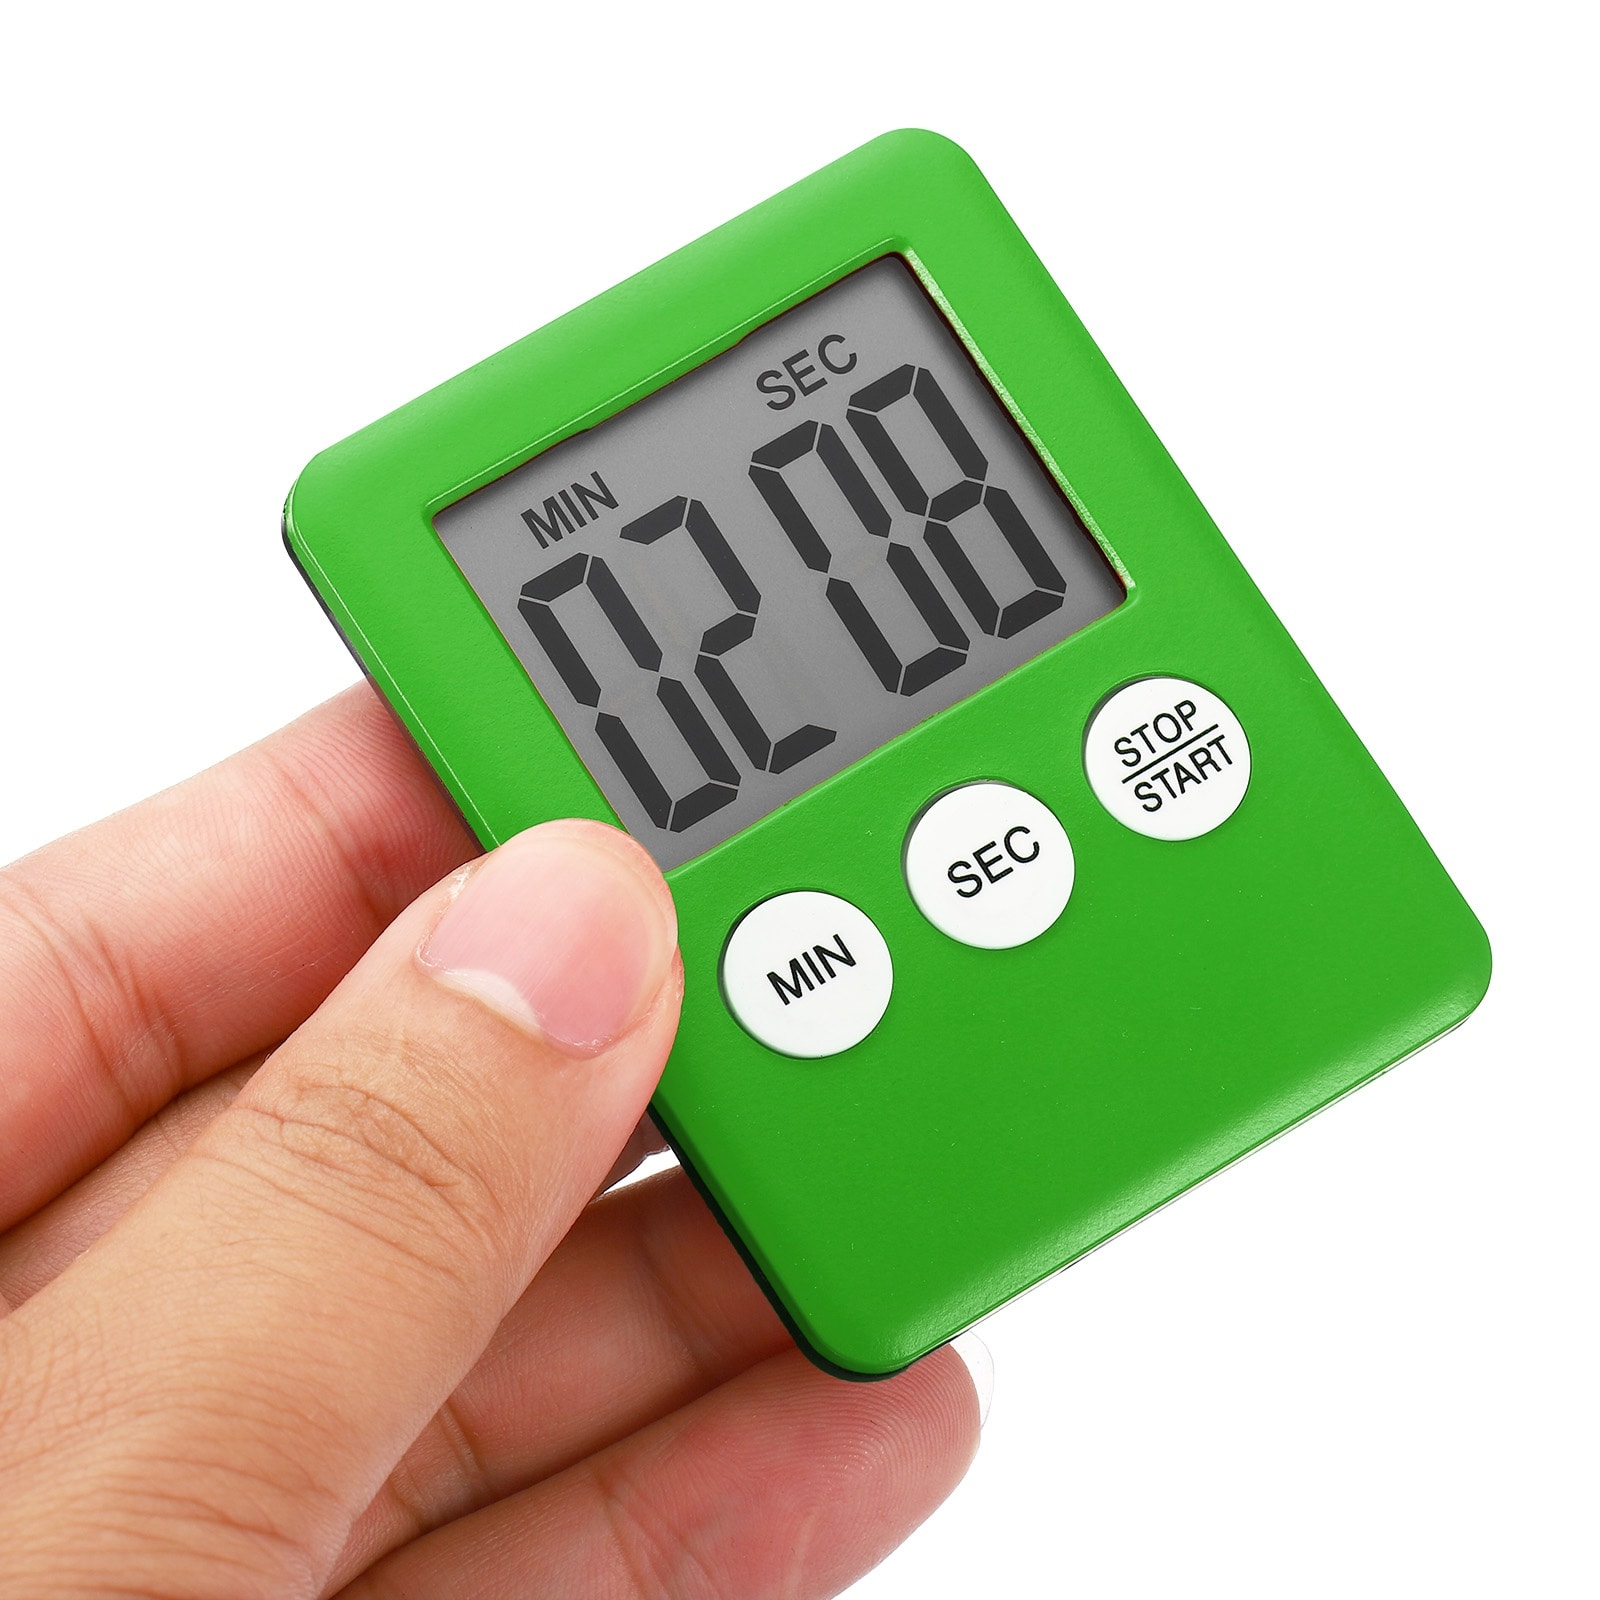 Digital Timer,2Pcs Small Count Down/UP Clock with Magnetic,Kitchen